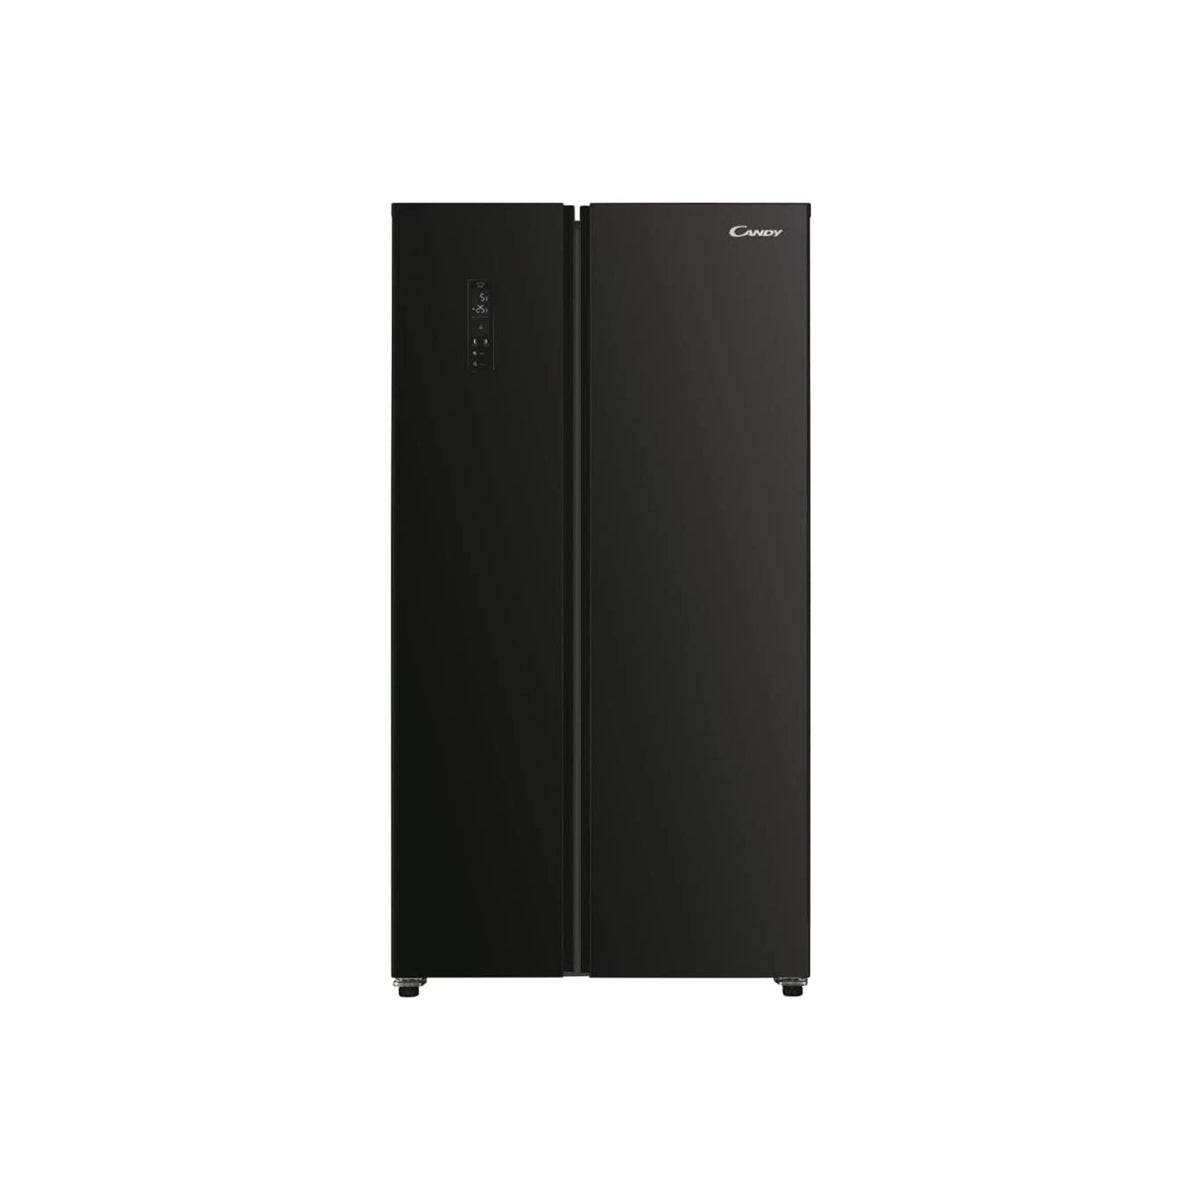 Candy 442L Side By Side American Style Fridge Freezer - Black | CHSBSV5172BKN from Candy - DID Electrical